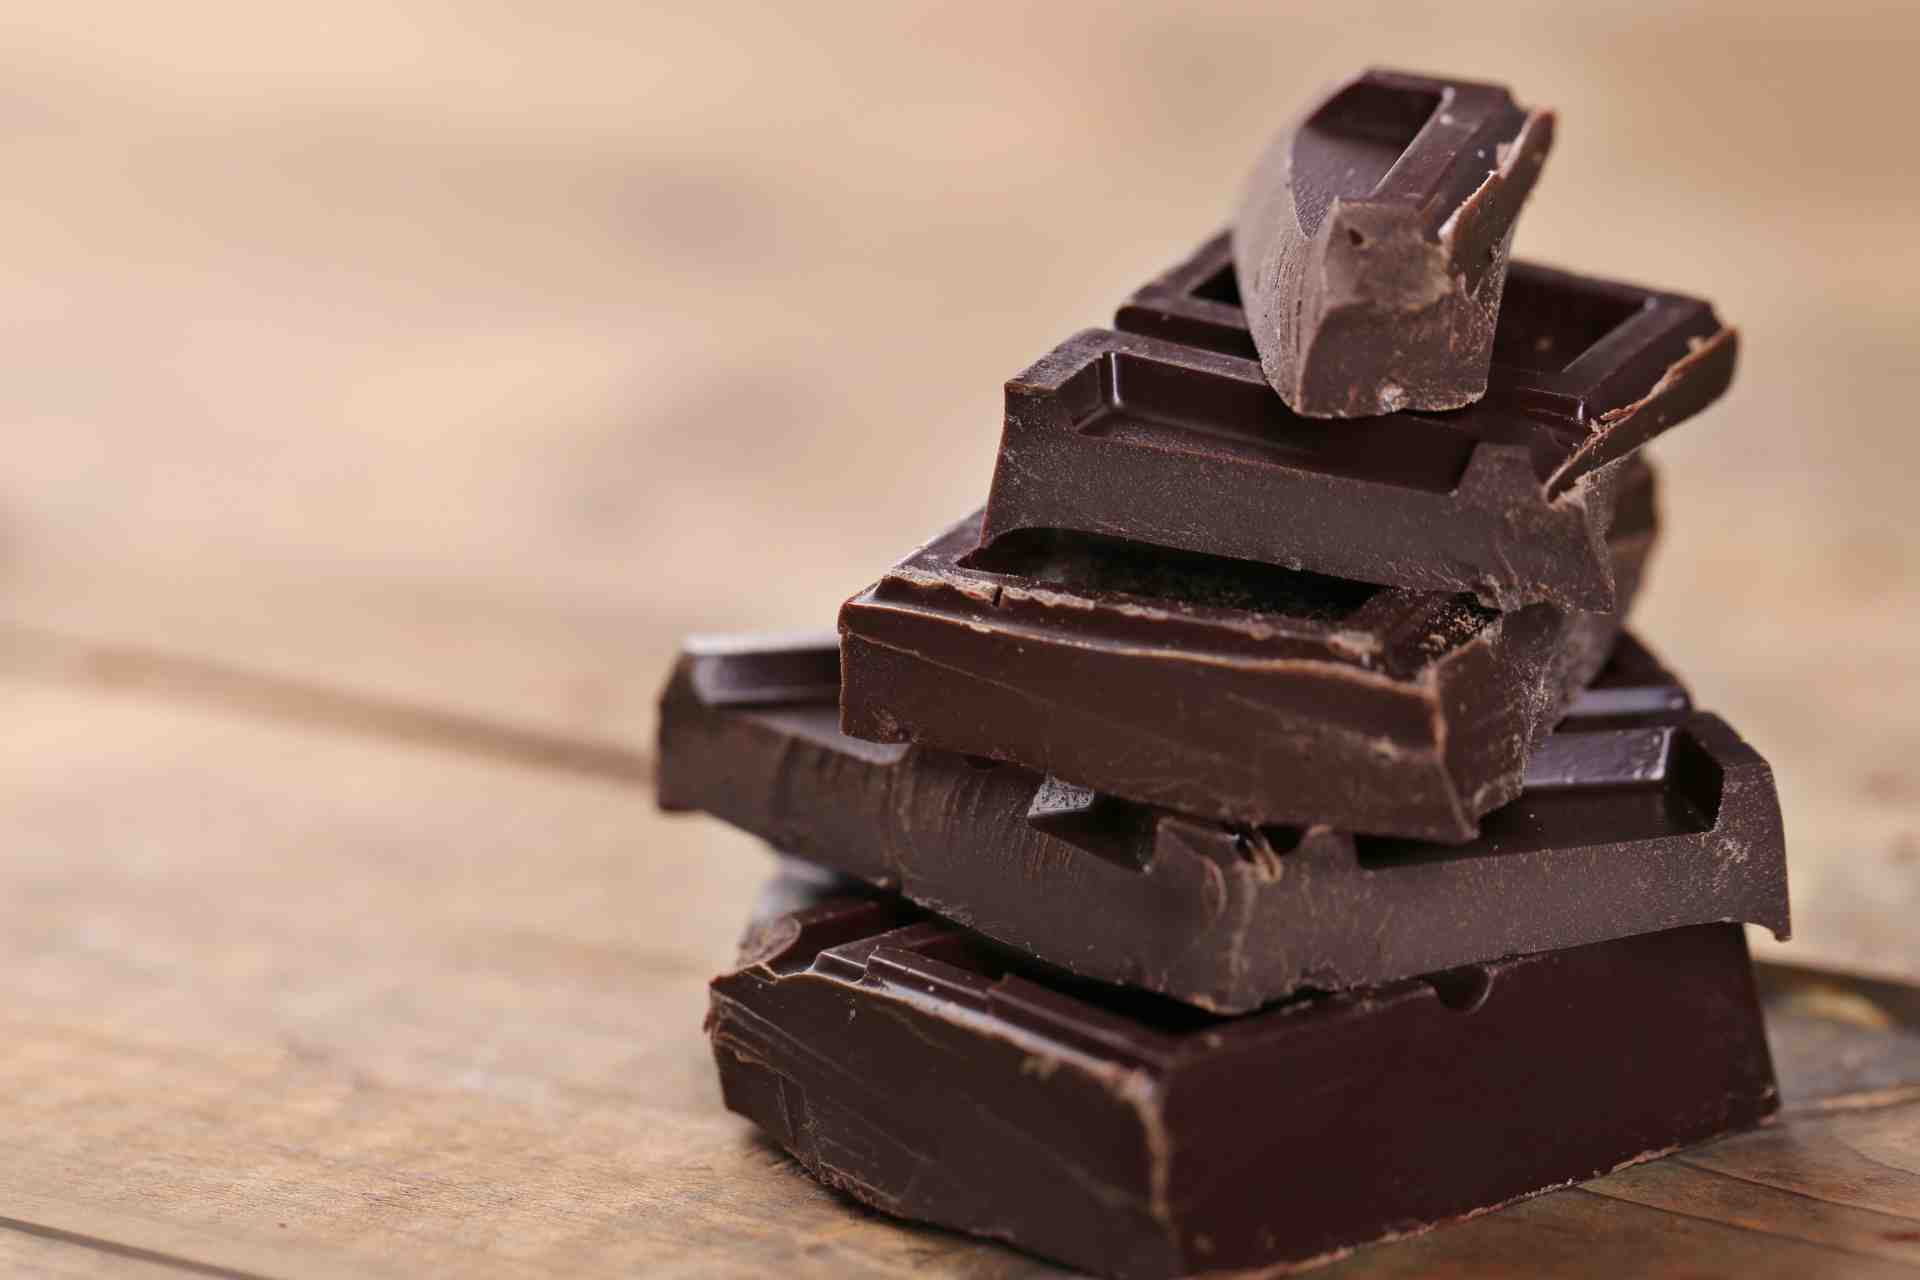 Dark Chocolate Is a Low-Calorie Healthy Snack